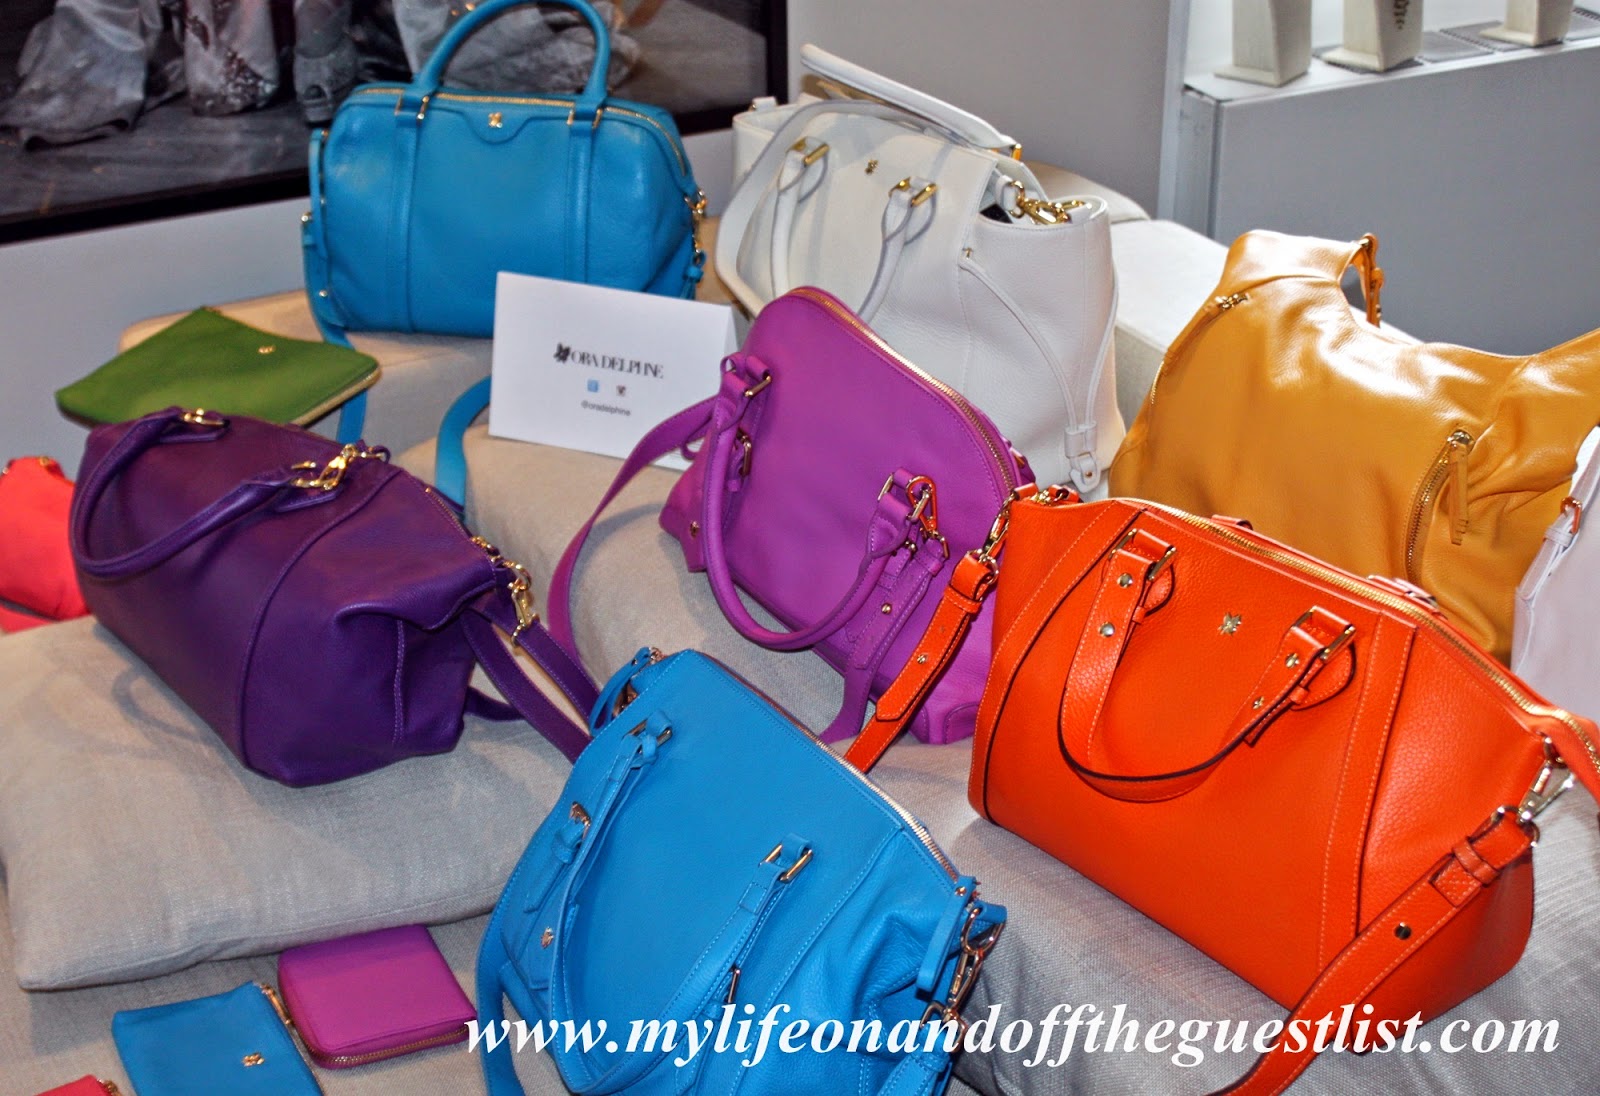 Ora Delphine Spring 2015 Handbag Collection - My Life on (and off